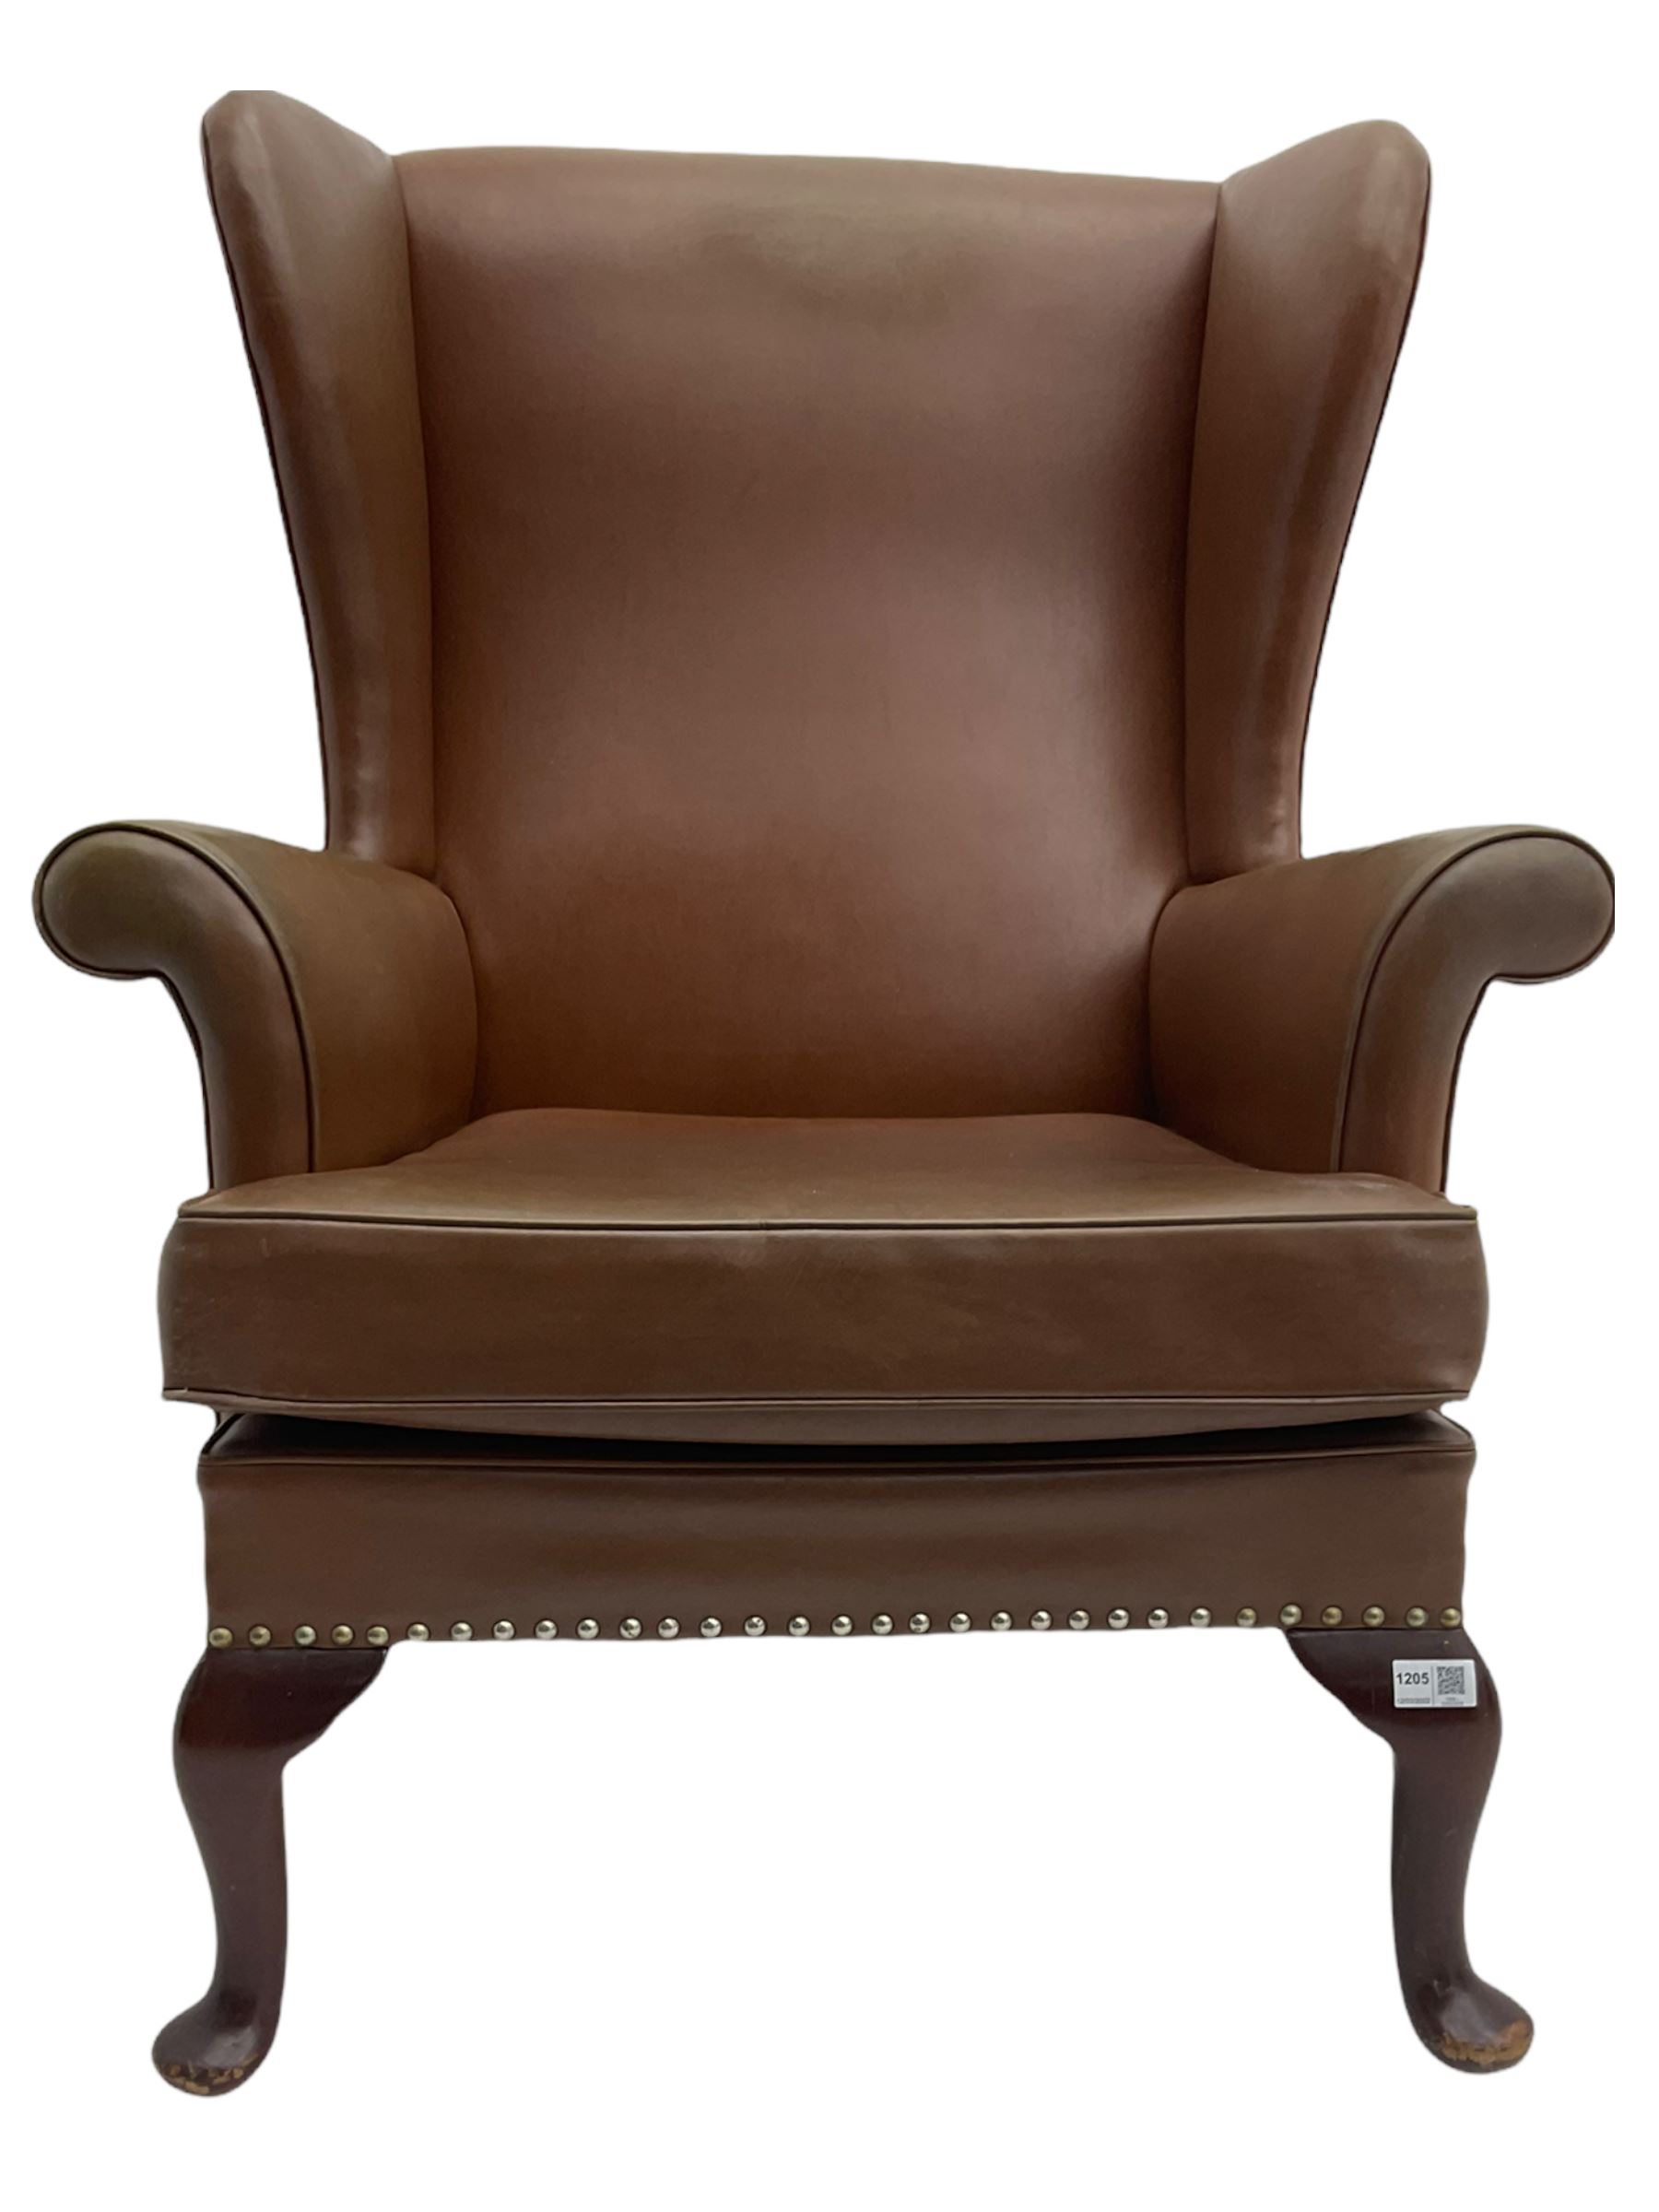 Parker Knoll - mid-20th century wing back armchair